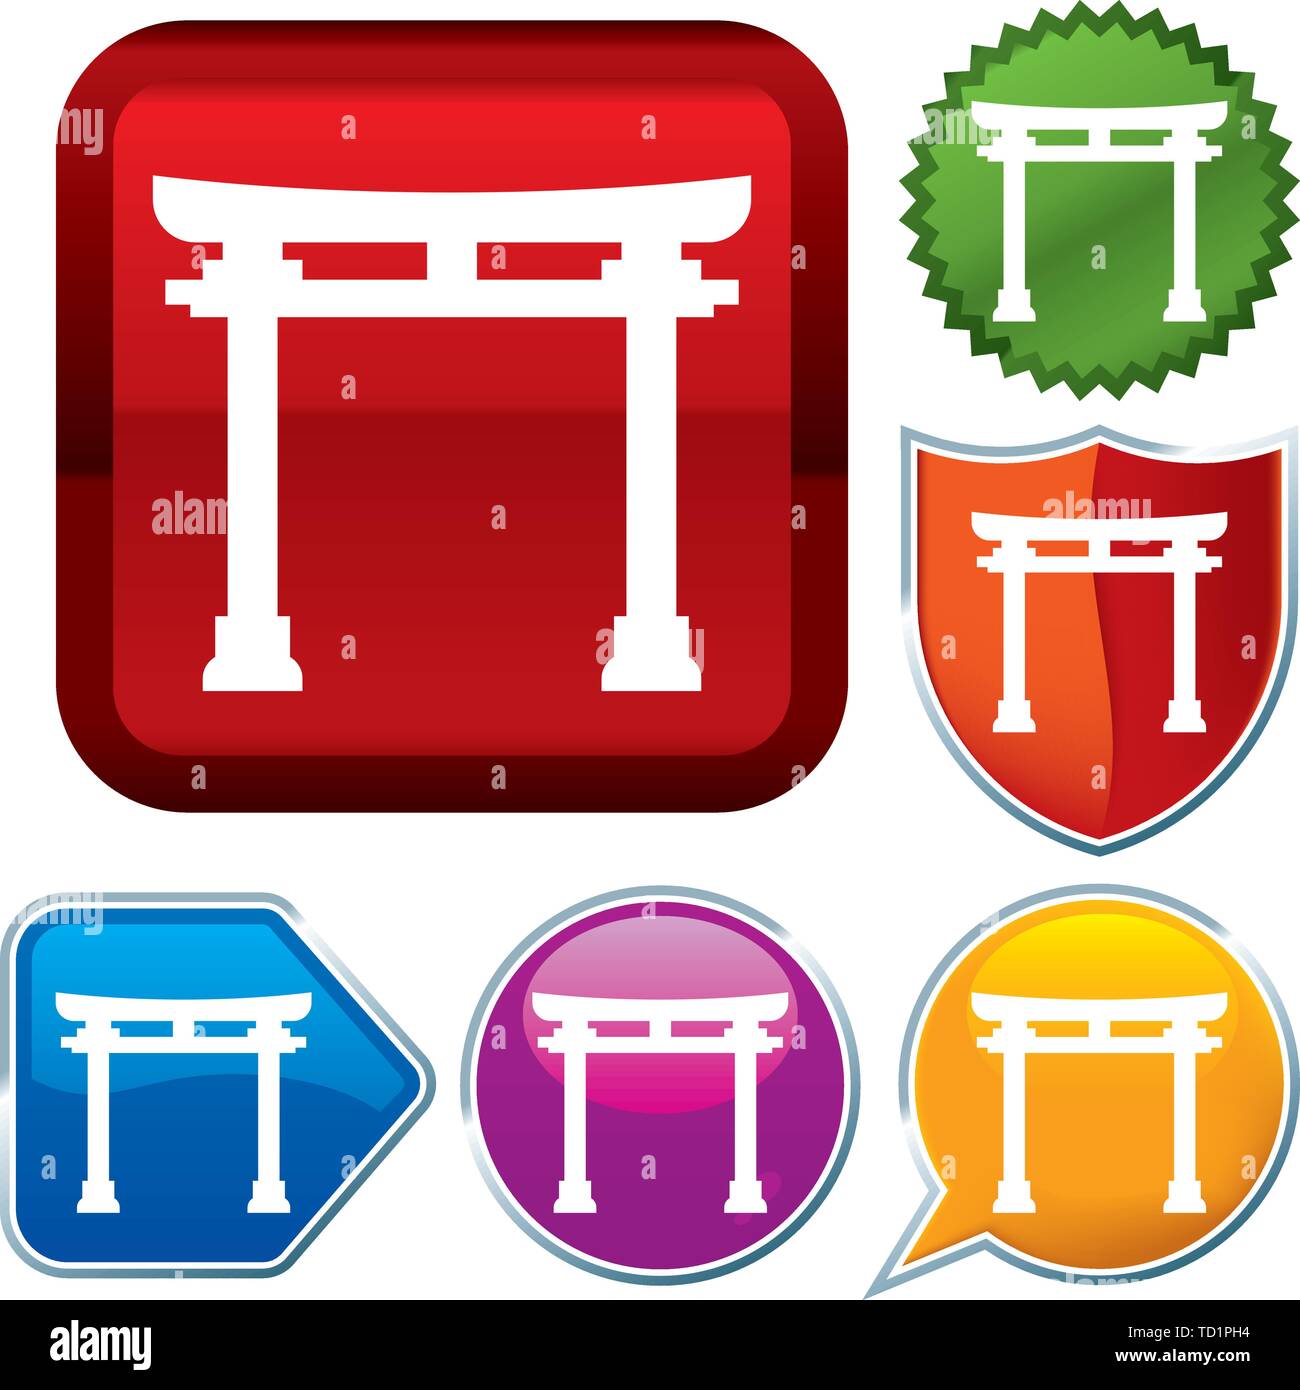 Vector illustration. Set shiny icon series on buttons. Shintoism. Stock Vector